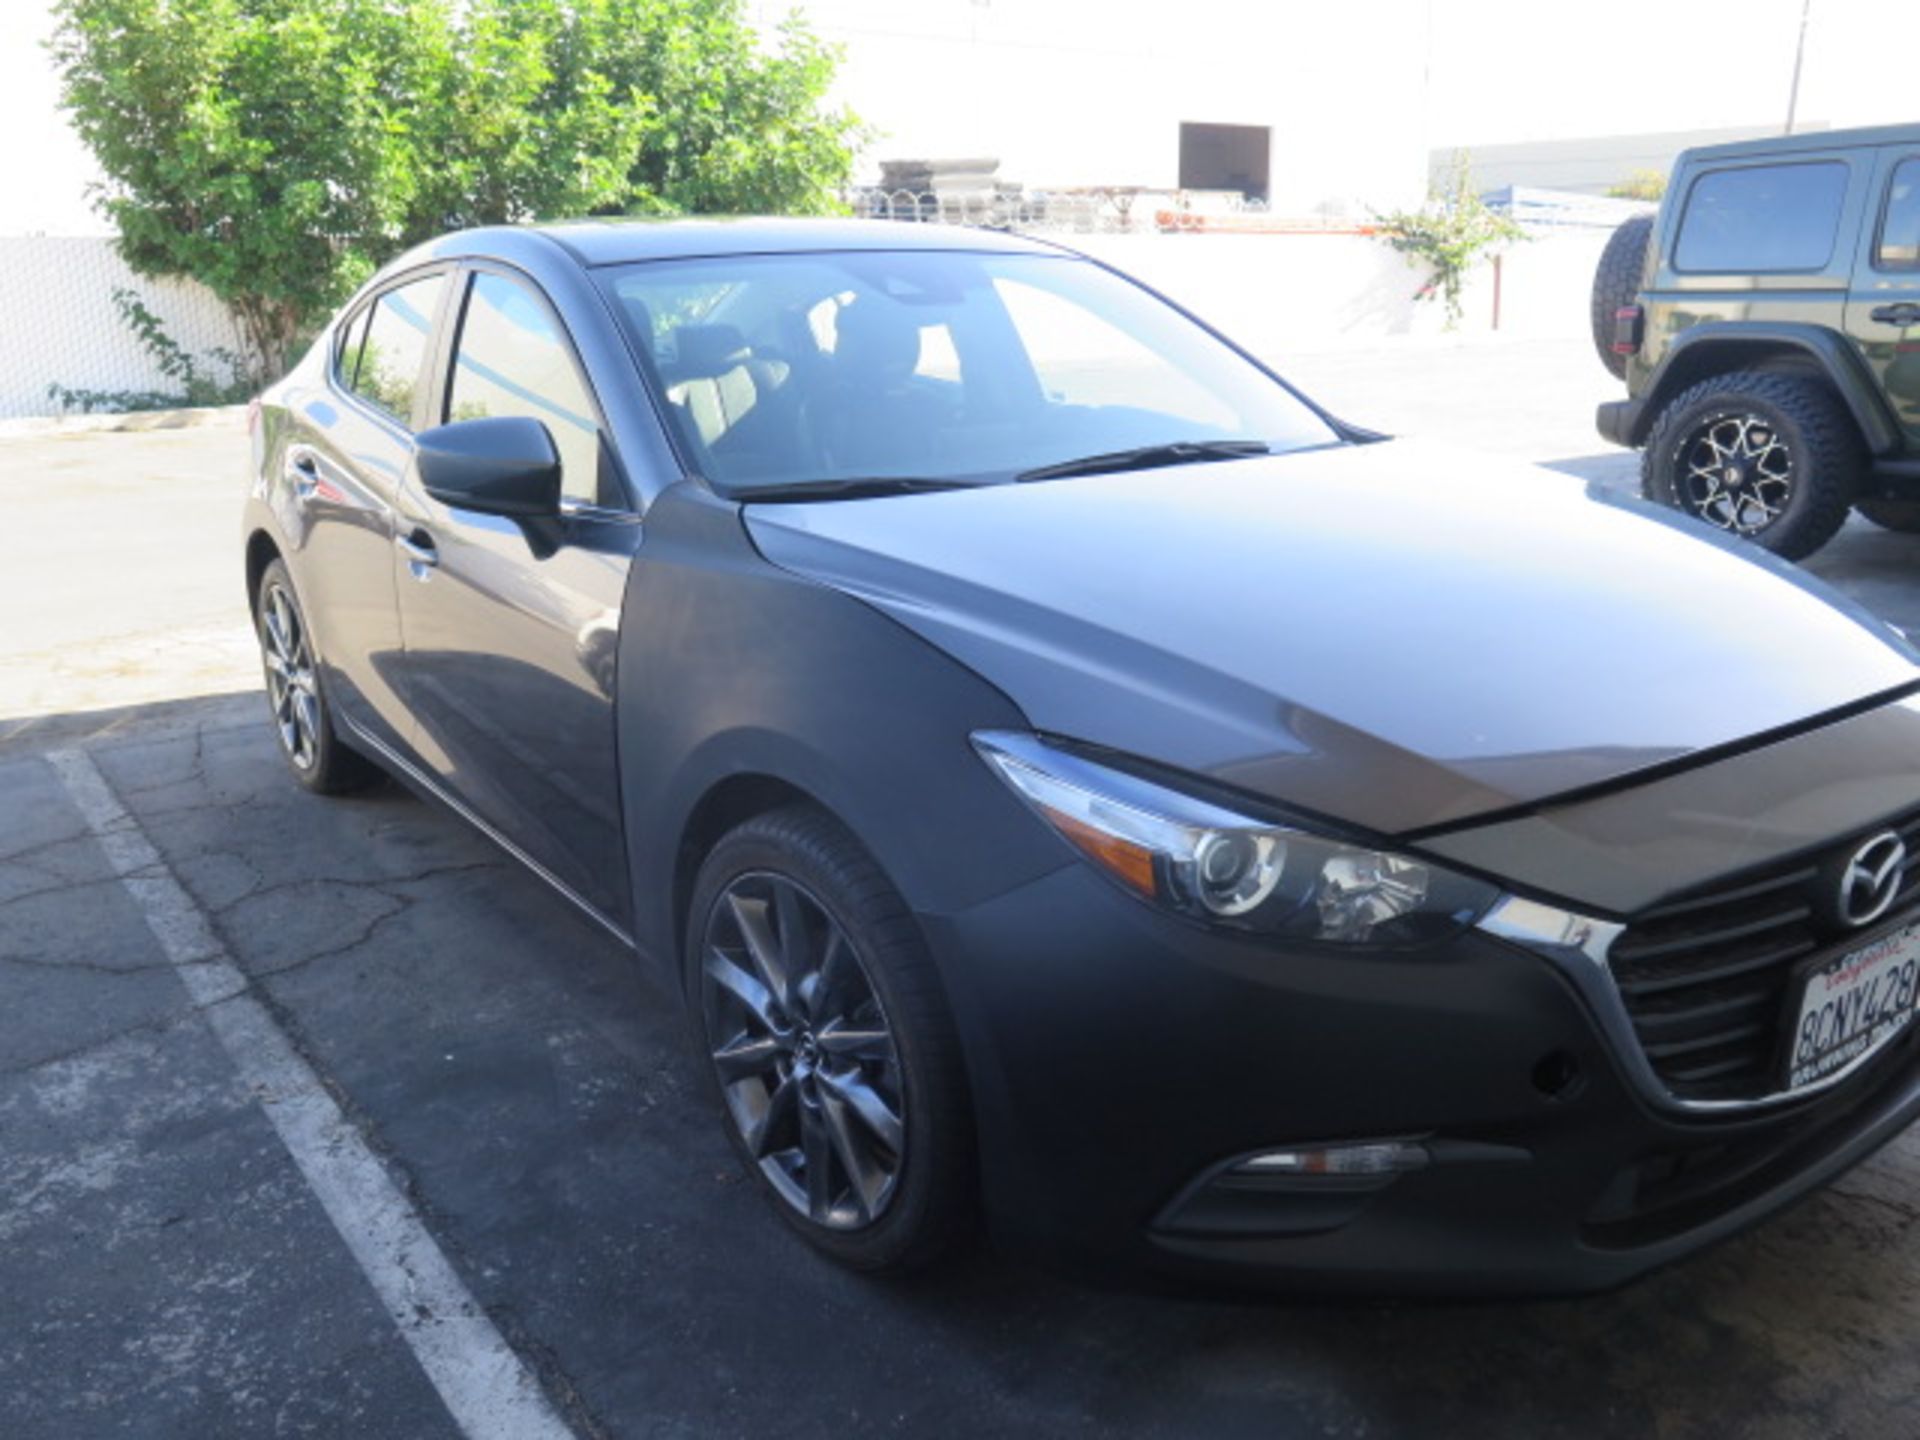 2018 Mazda 3 4-Door Sedan Lisc# 8CNY428 w/Gas Engine, Automatic Trans, Front End Damage, SOLD AS IS - Image 3 of 25